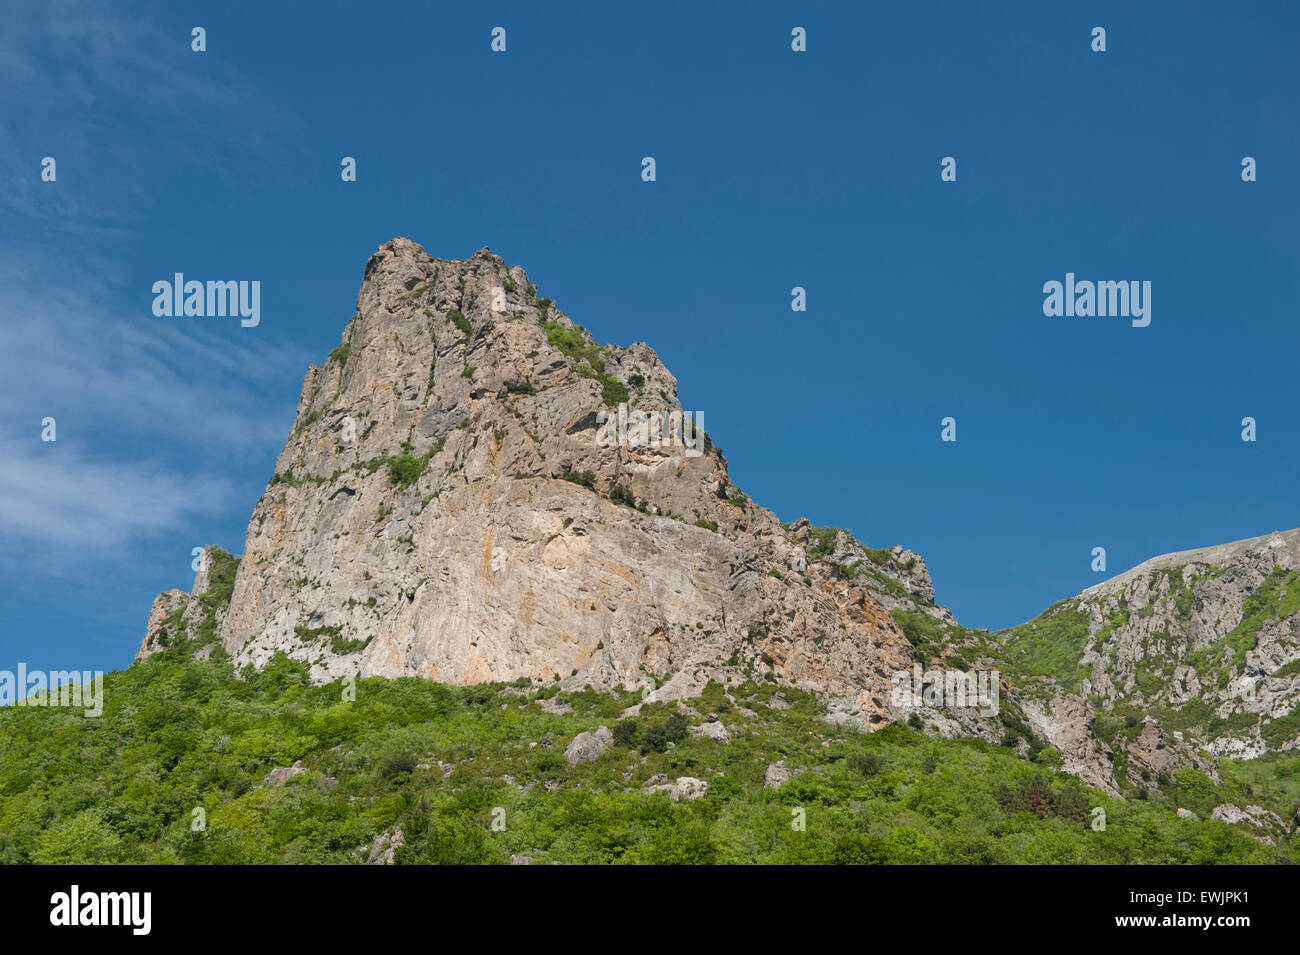 The legendary Pech (or Pic) de Bugarach, known as survival place for the end of the world and UFO sightings, Aude, France Stock Photo